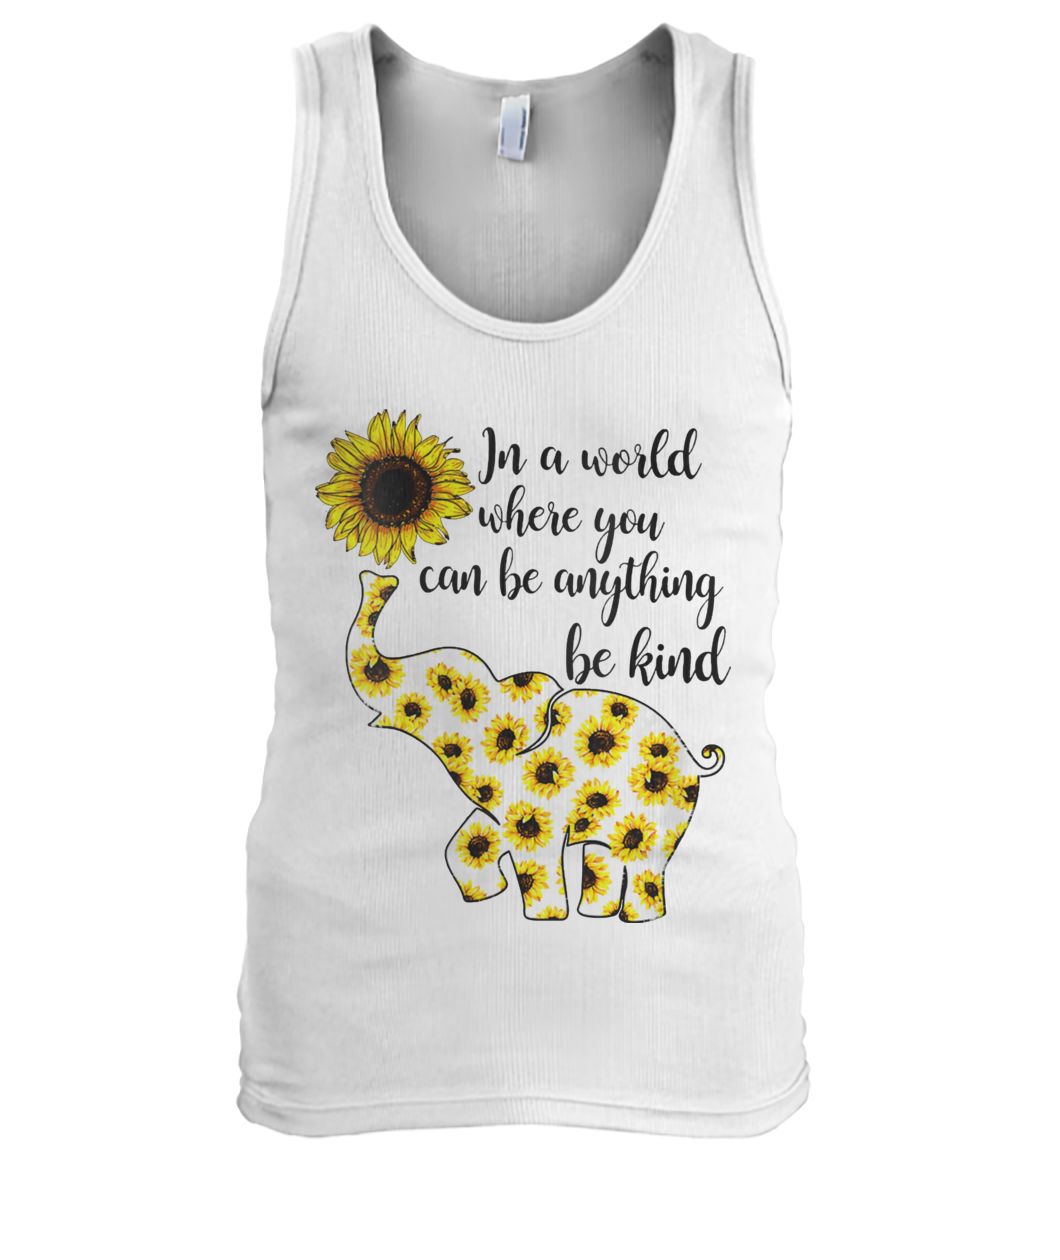 Sunflower elephant in a world where you can be anything be kind men's tank top